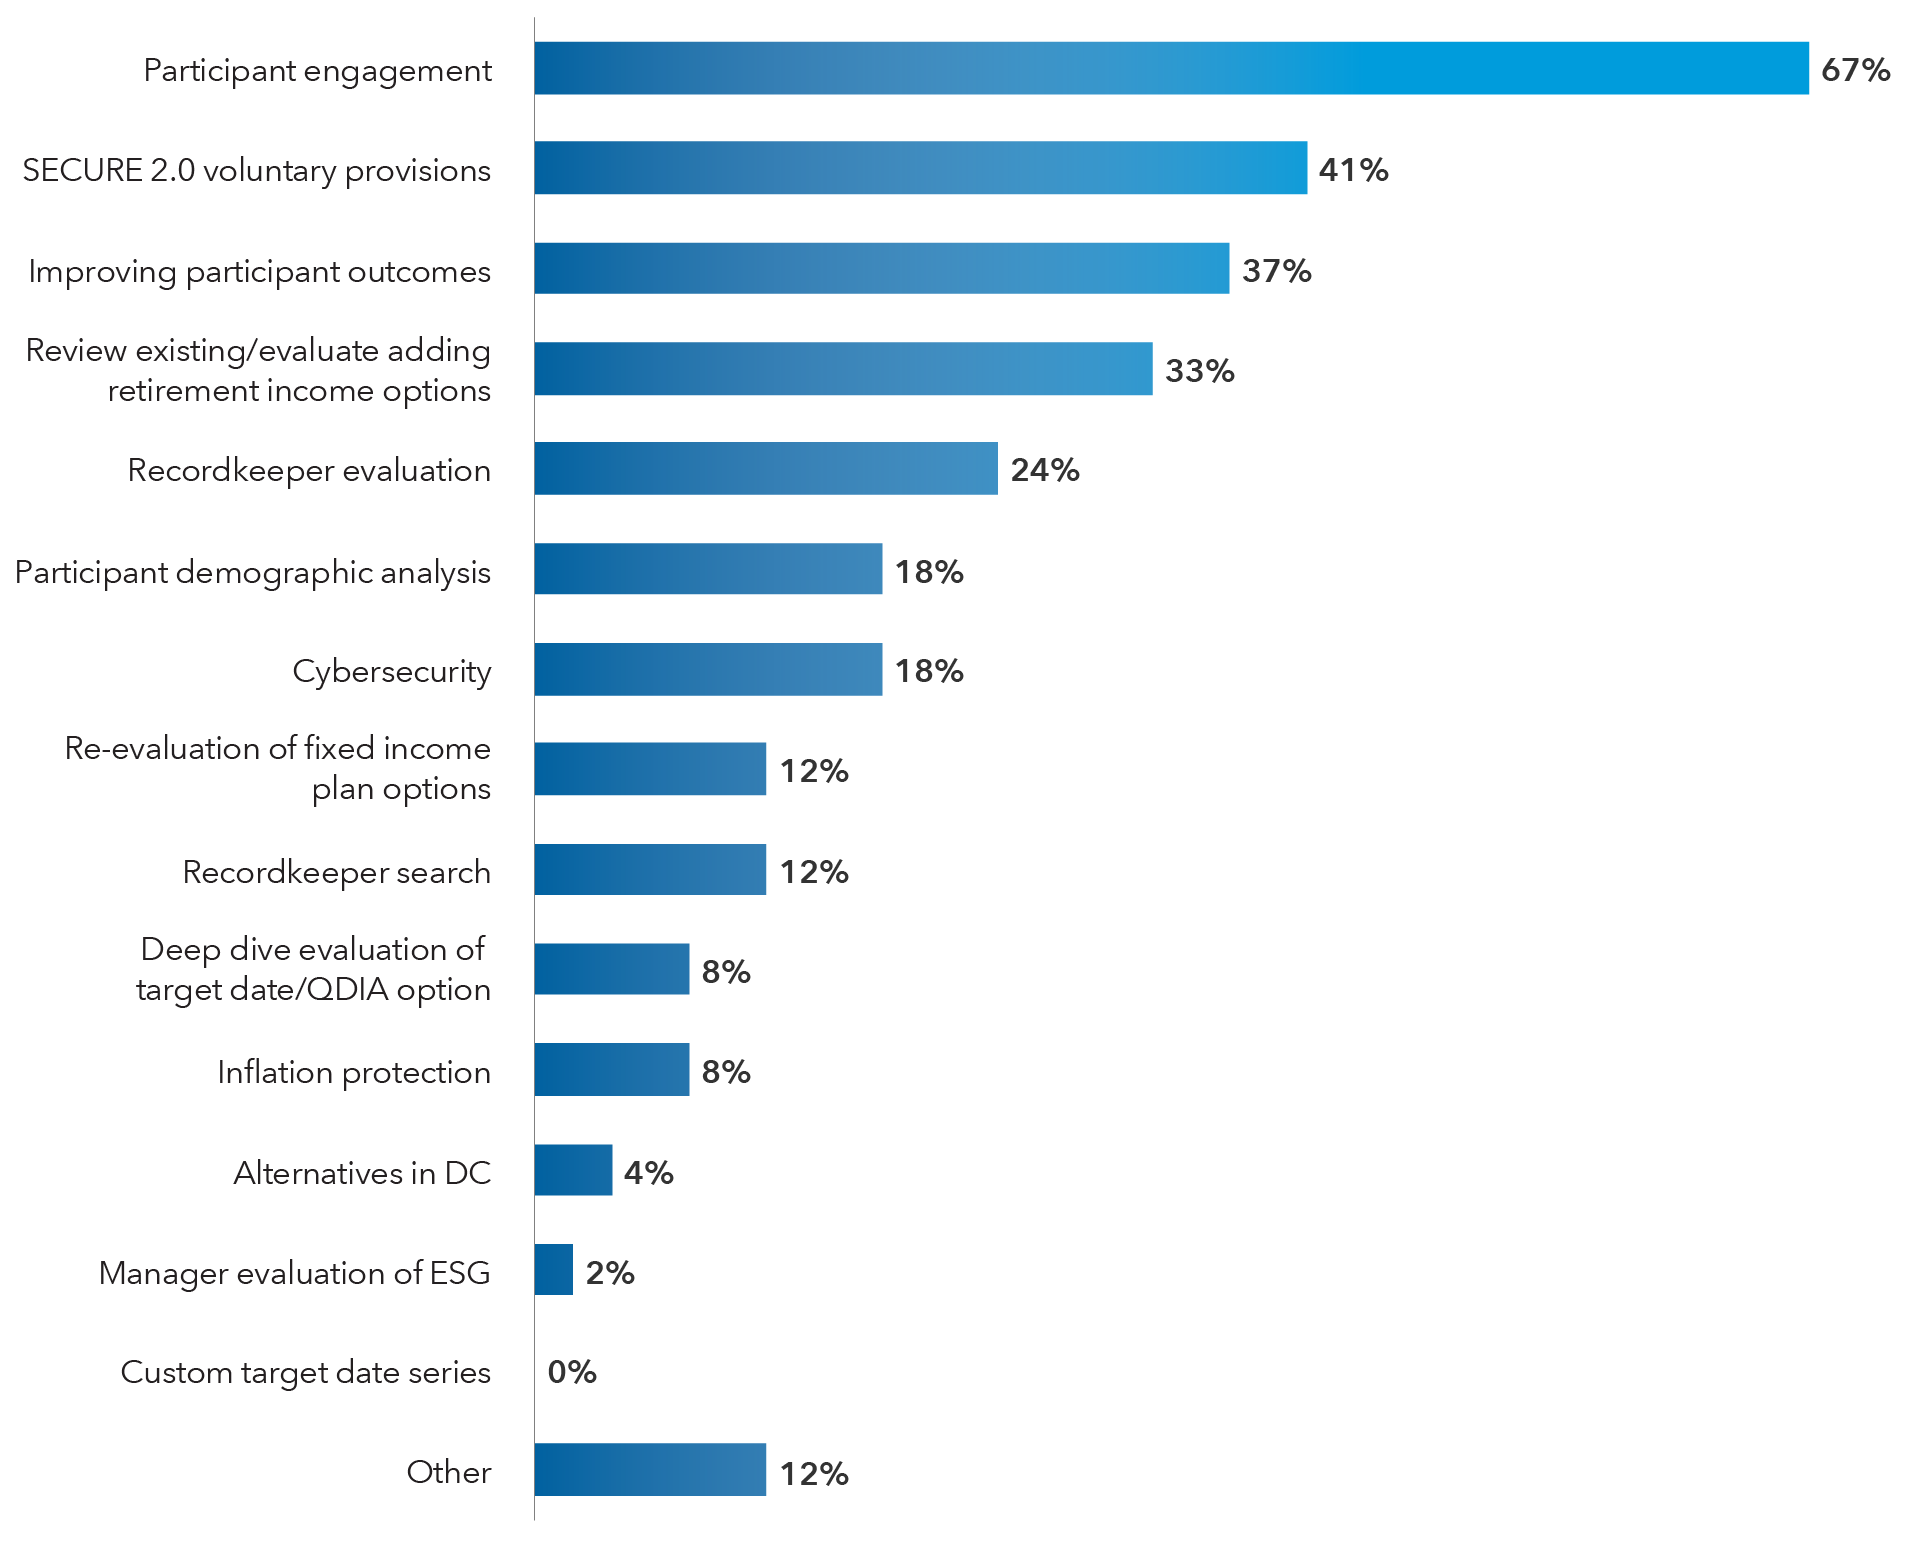 This chart shows the top priorities that defined contribution plan sponsors identified for the next 12 months in our survey. Participant engagement: 67%; SECURE 2.0 voluntary provisions: 41%; improving participant outcomes: 37%; review existing/evaluate adding retirement income options: 33%; recordkeeper evaluation: 24%; participant demographic analysis: 18%; cybersecurity: 18%; re-evaluation of fixed income plan options: 12%; recordkeeper search: 12%; deep dive evaluation of target date/QDIA option: 8%; inflation protection: 8%; alternatives in DC: 4%; manager evaluation of ESG: 2%; custom target date series: 0%; and other: 12%.